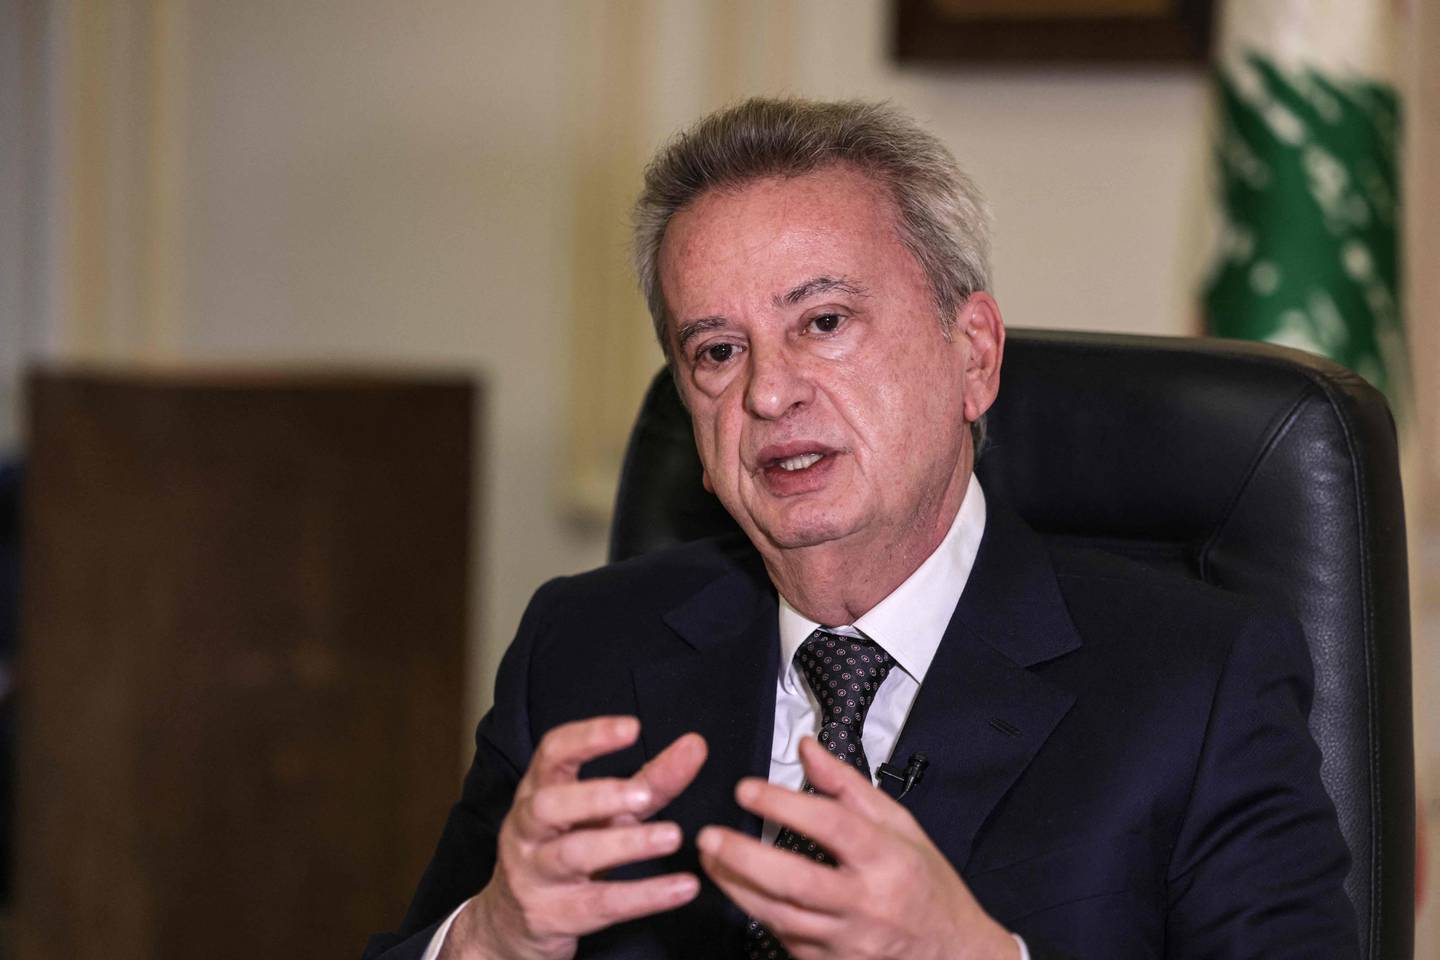 Lebanon's central bank governor Riad Salameh was charged with illicit enrichment. AFP